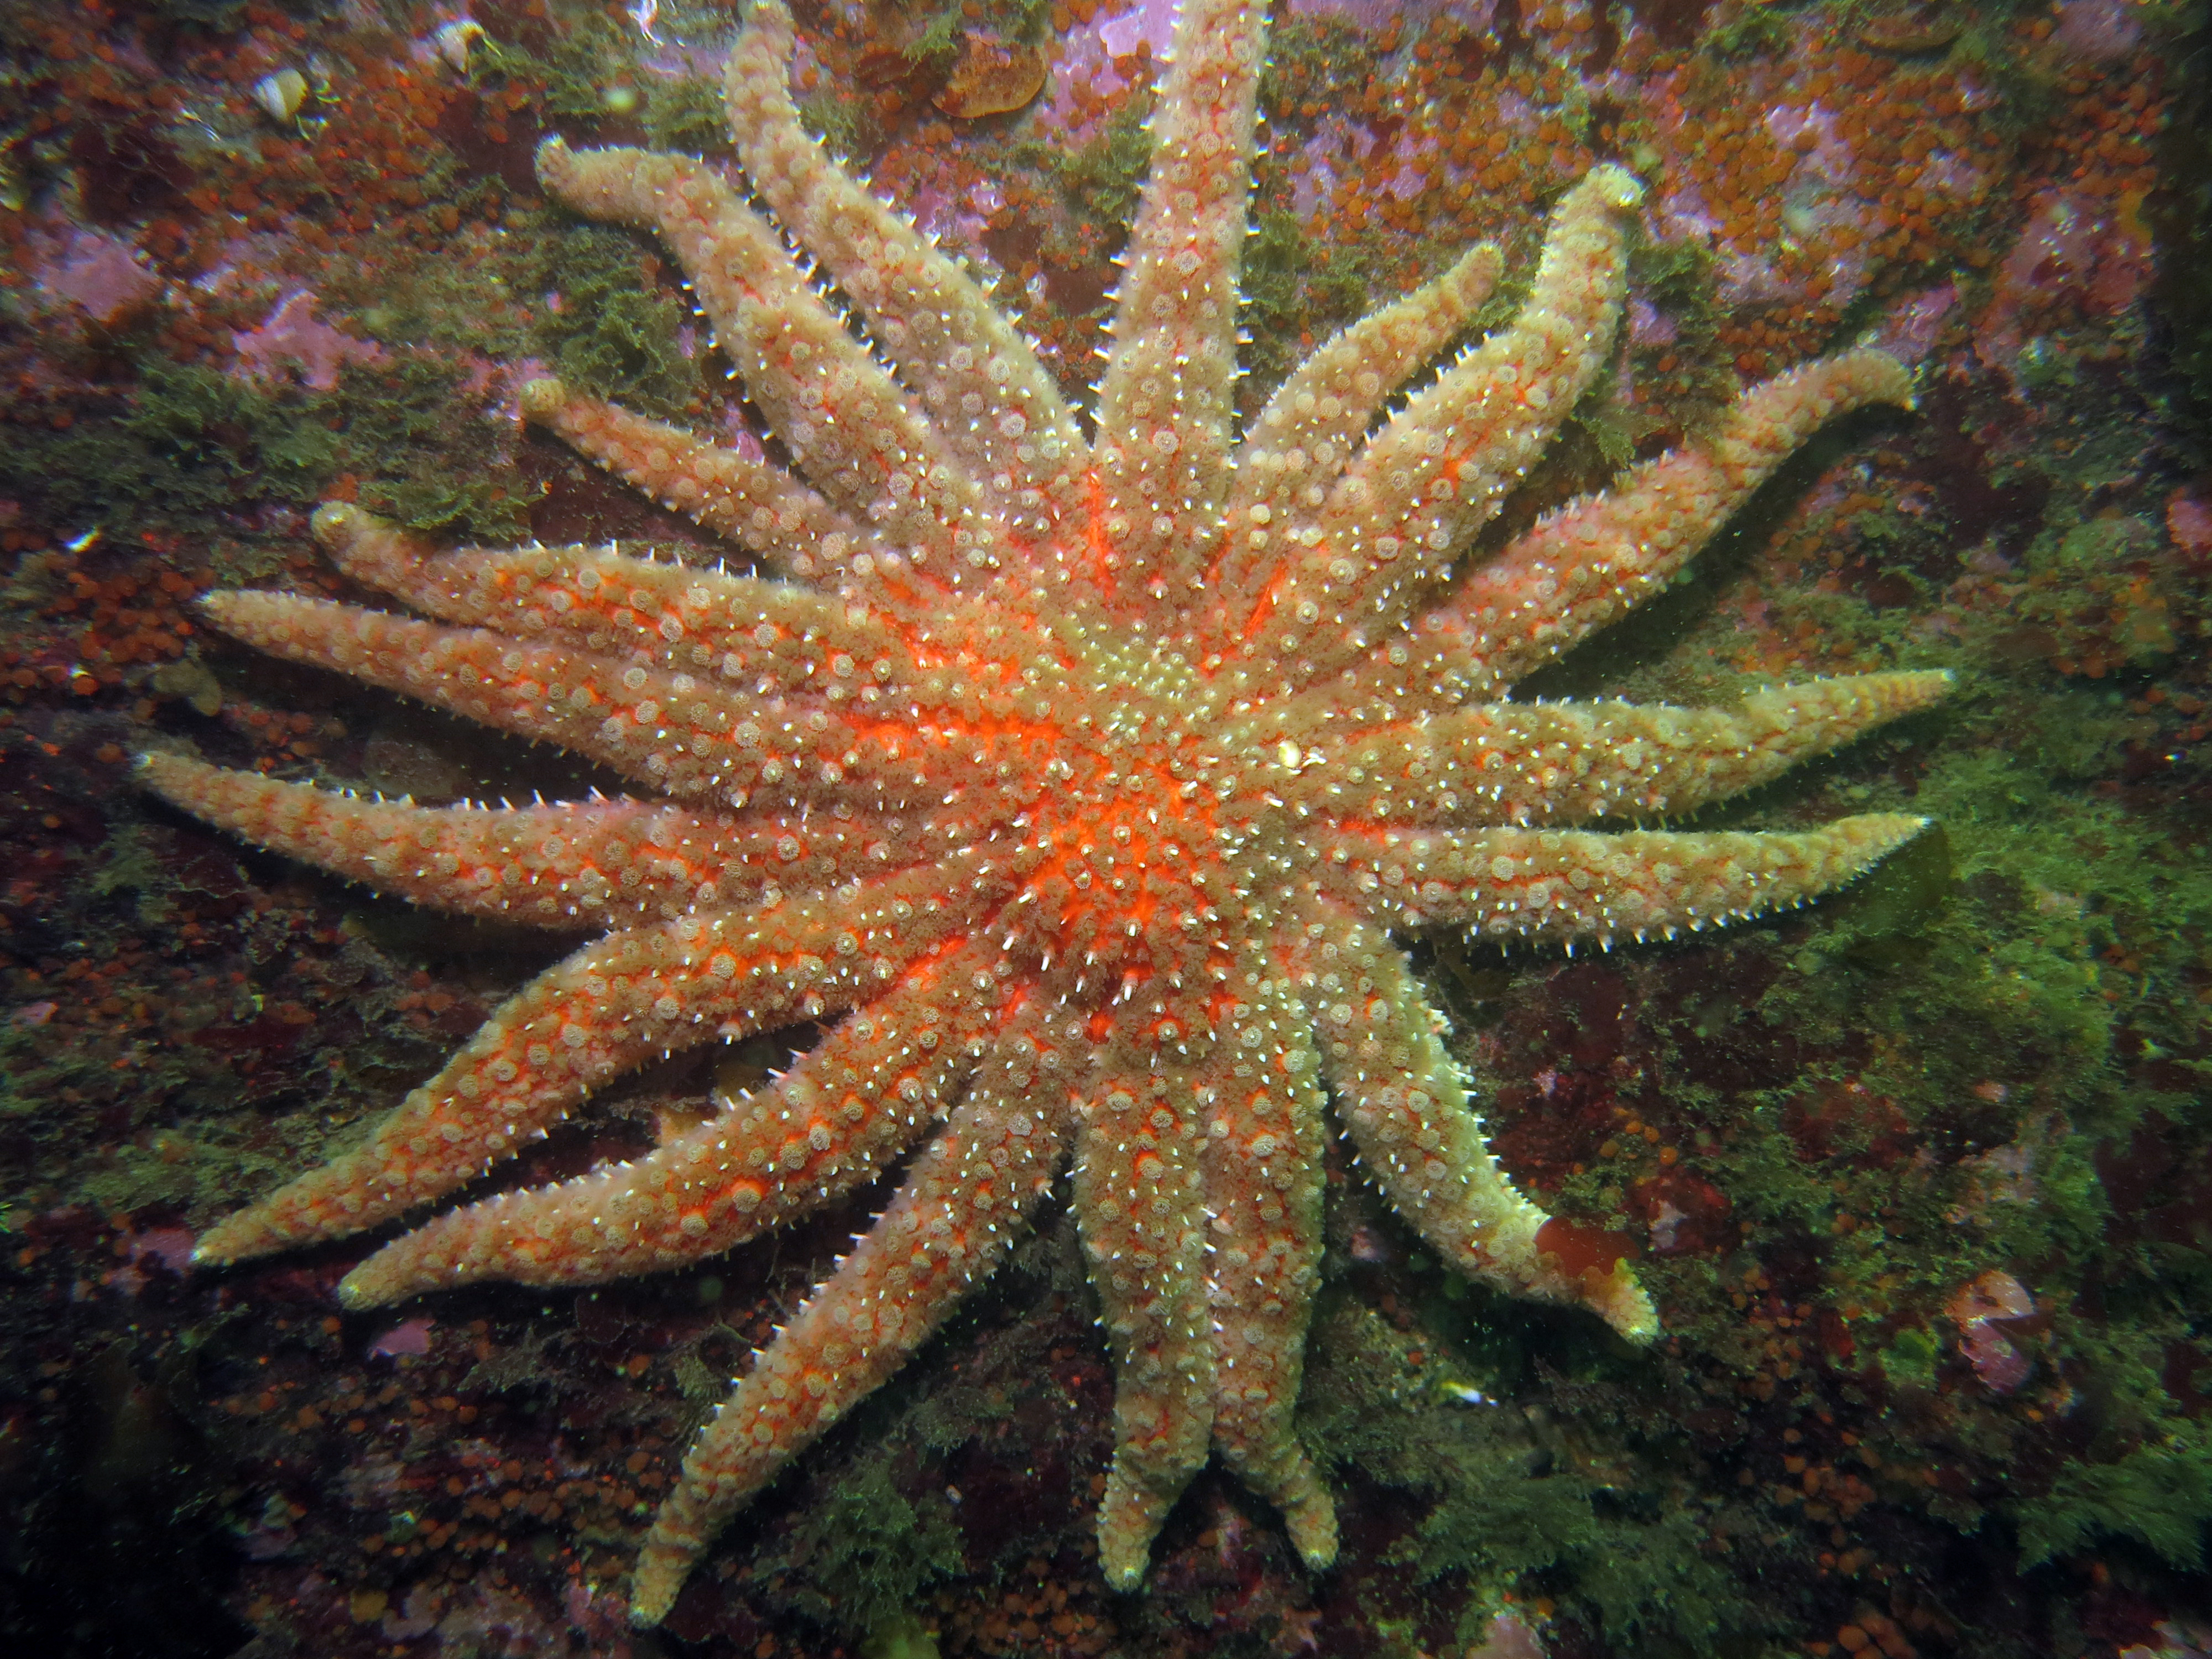 Scientists are growing sea stars in labs to help save the oceans